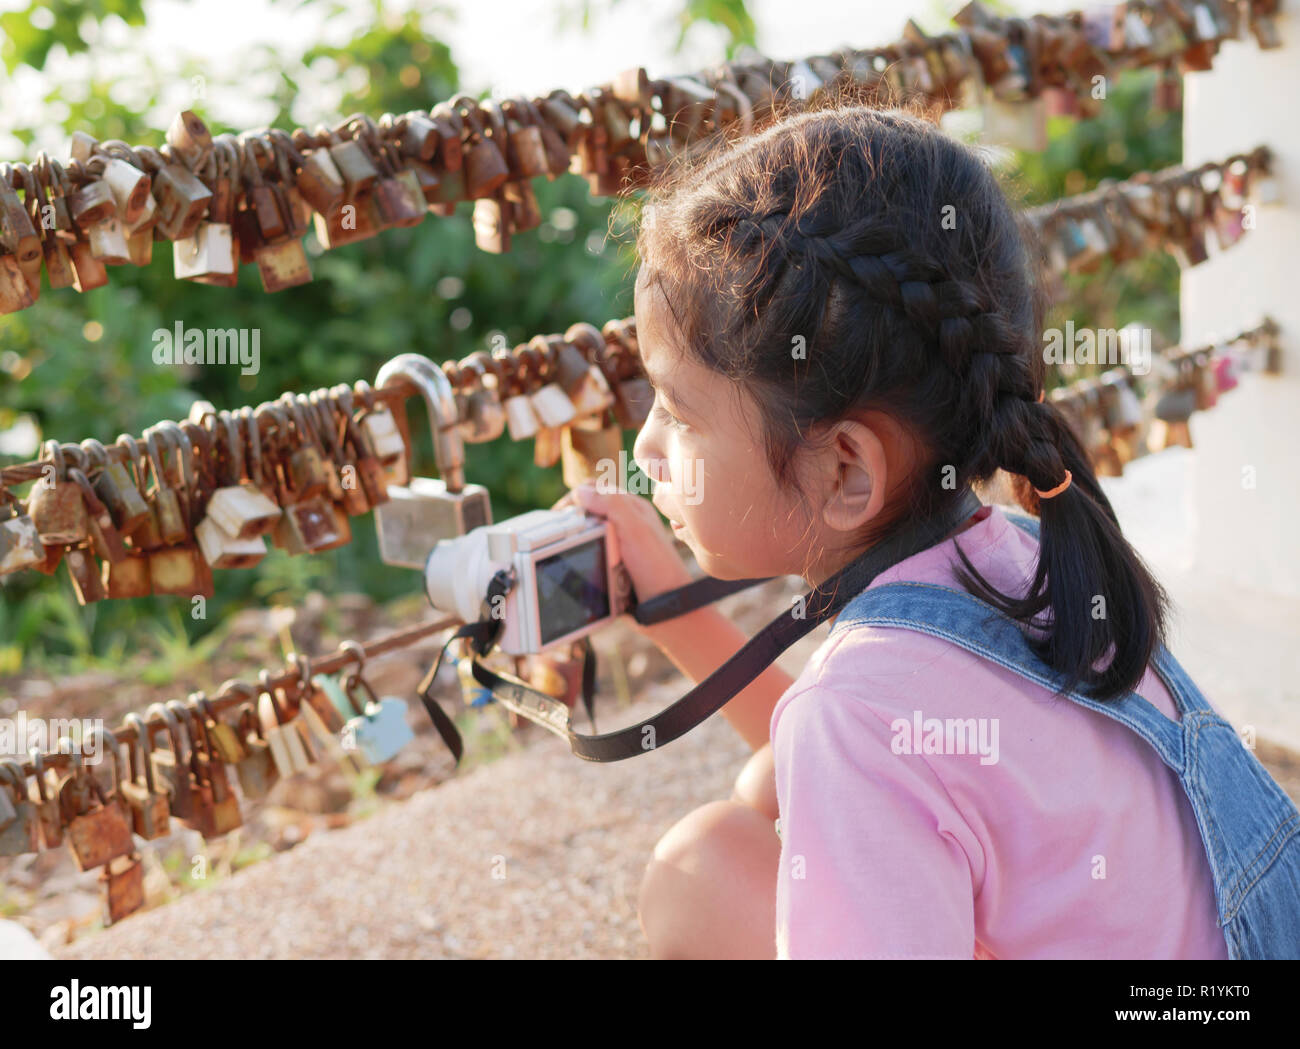 A little girl holding camera with taking a picture. Asian kid making photo travelling. Stock Photo